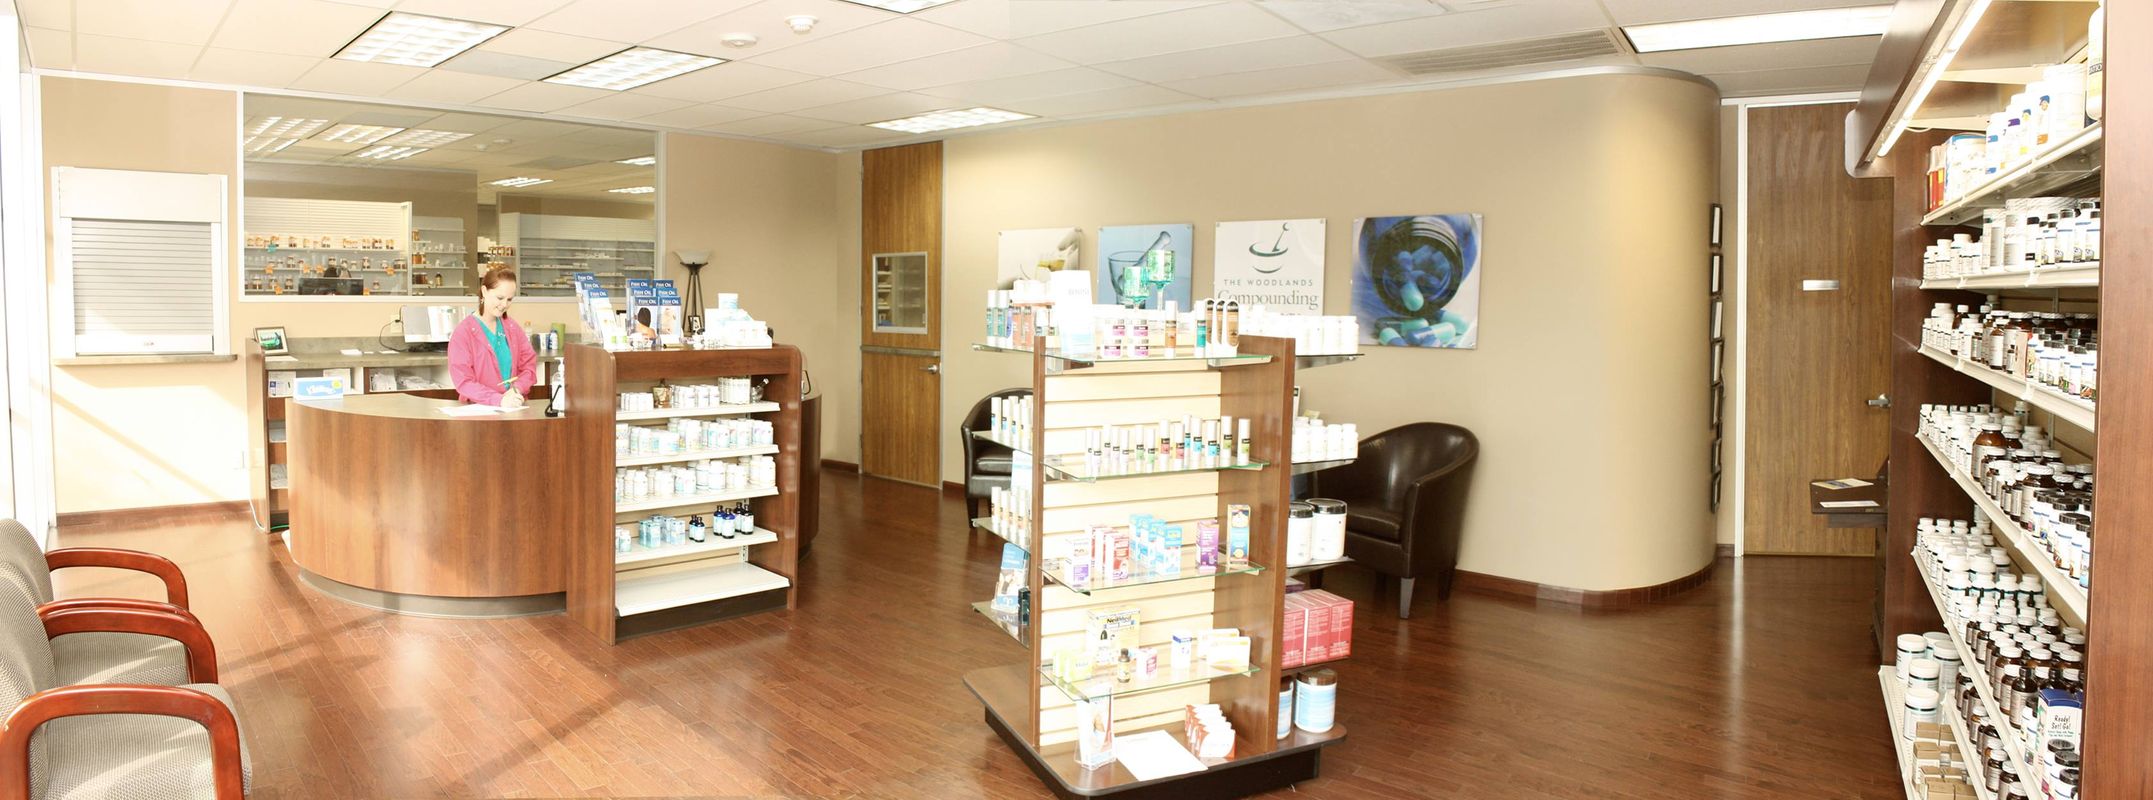 The Woodlands Compounding Pharmacy The Woodlands Compounding